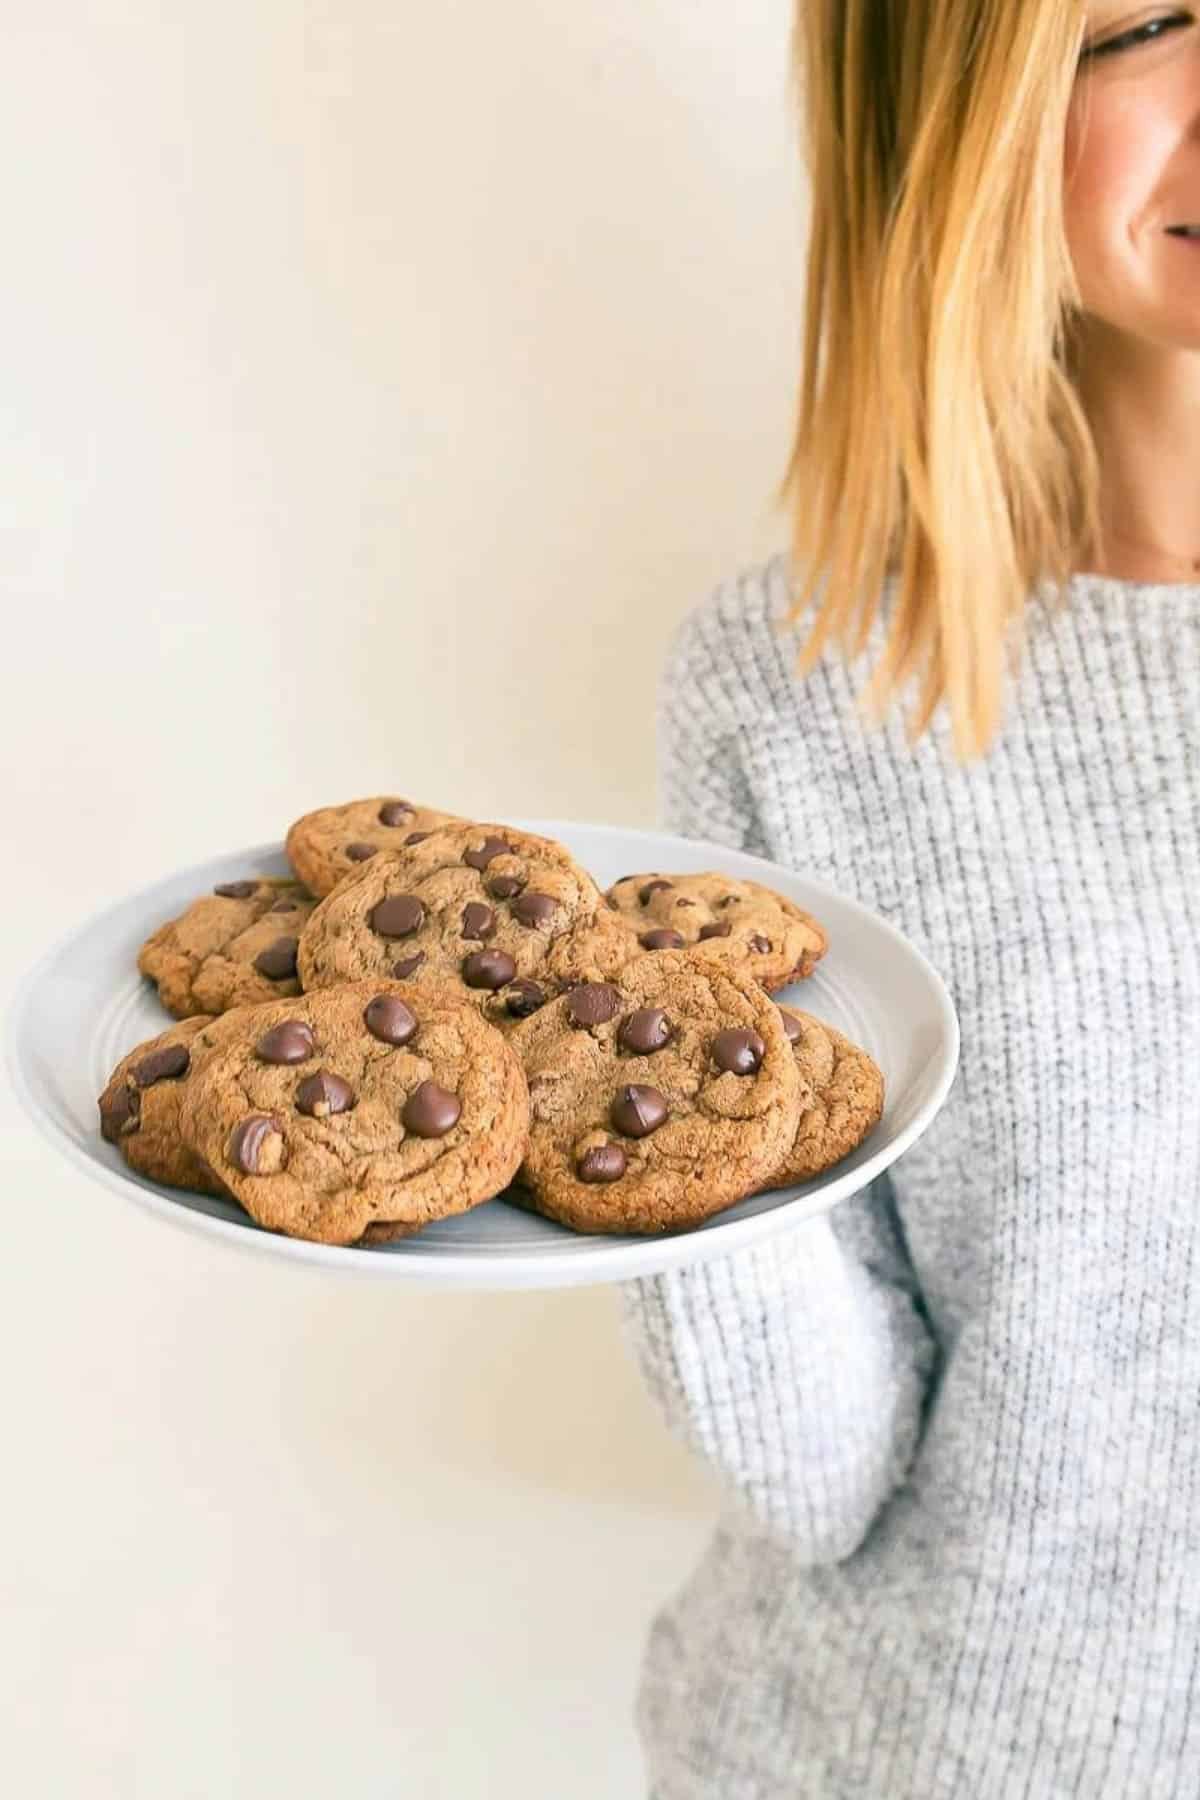 Woman with golden hair holding plate of healthy chocolate chip cookies.